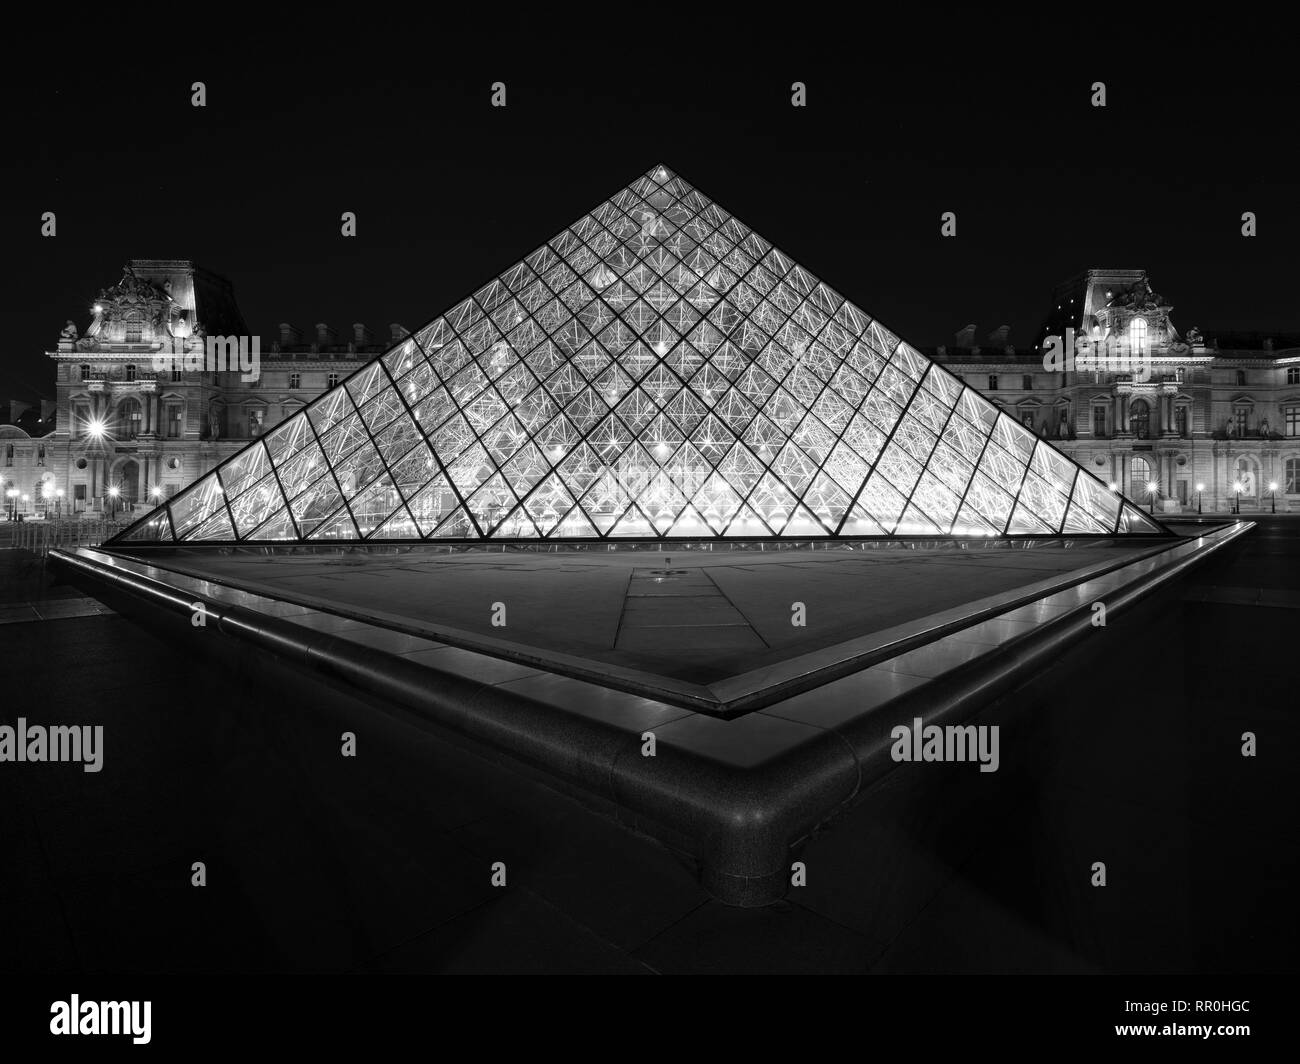 The Louvre Museum Pyramid was deigned by Pei and is a magnificent sight when it is illuminated in the evening. Stock Photo